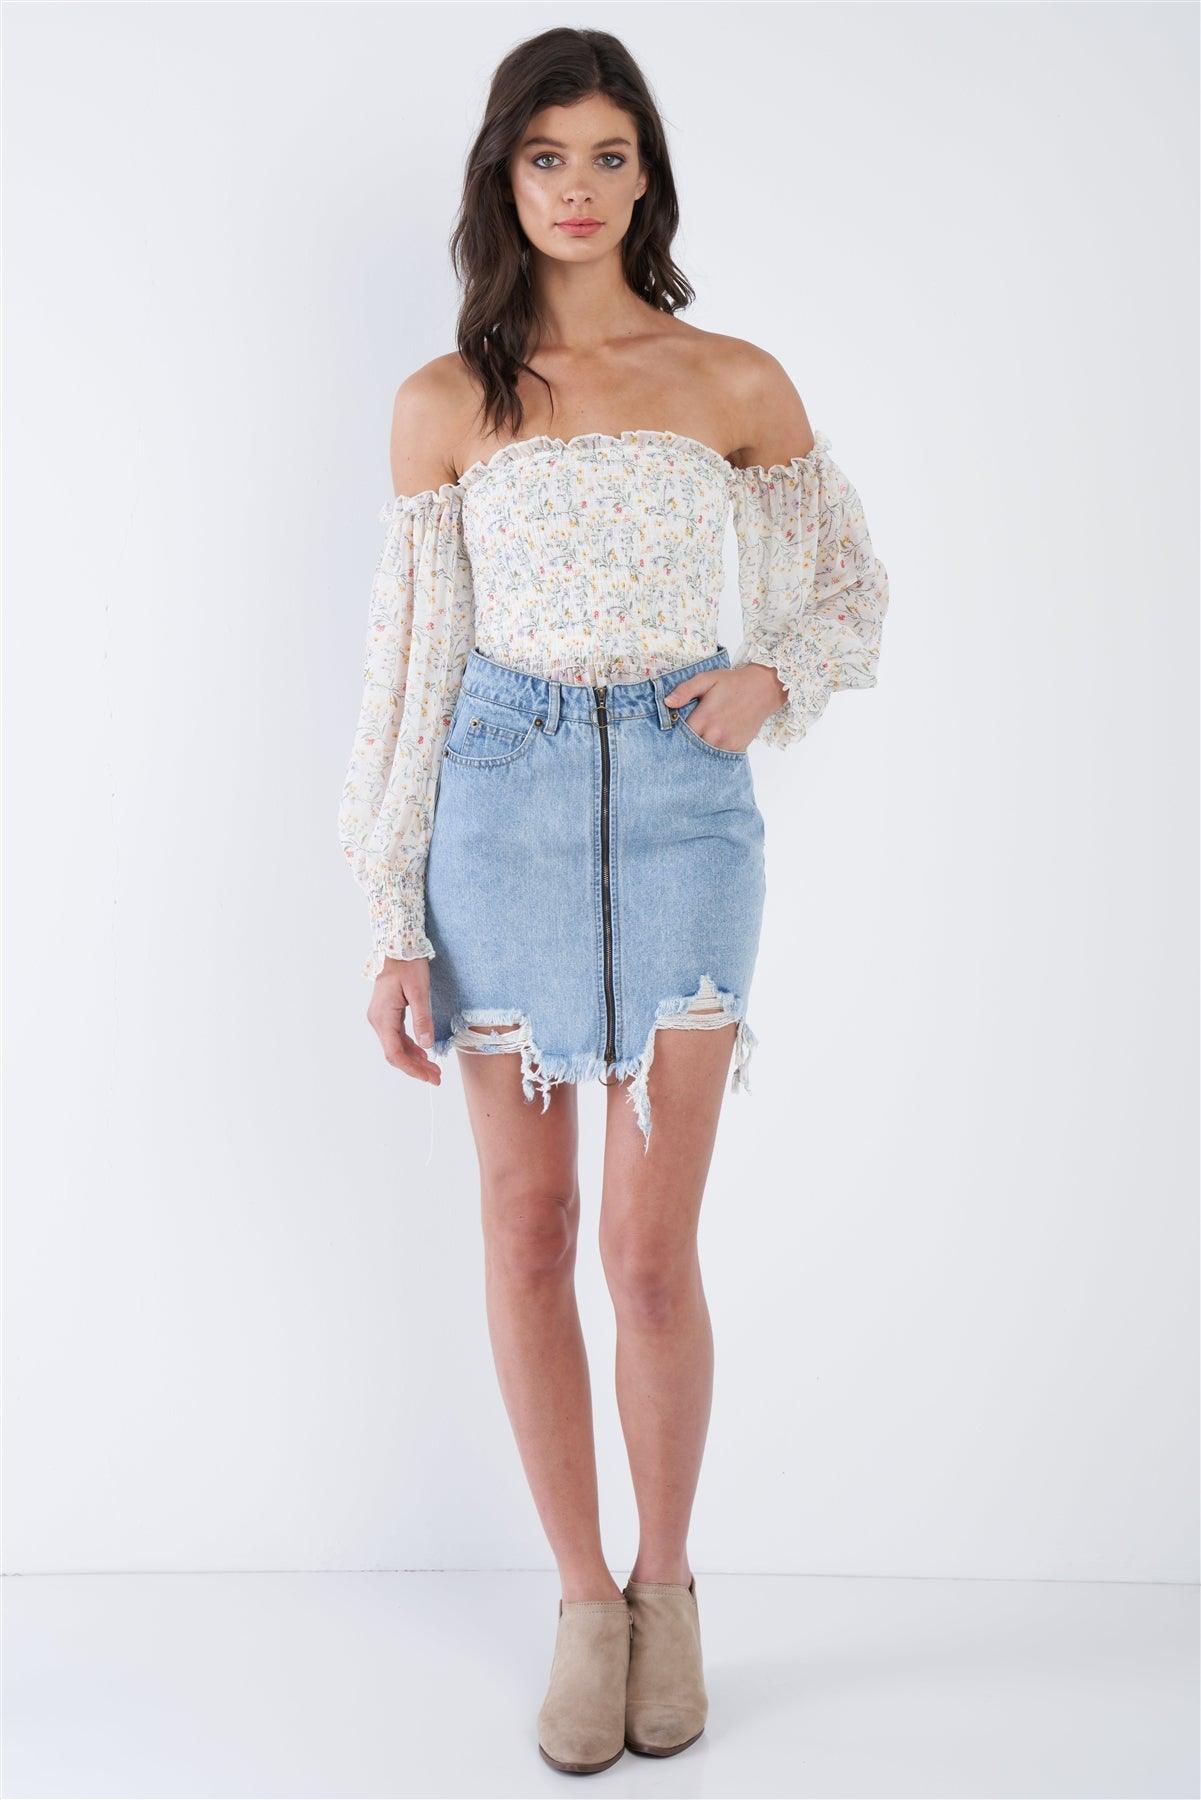 Off-White Sheer Floral Off-The-Shoulder Peplum Top  /3-2-1